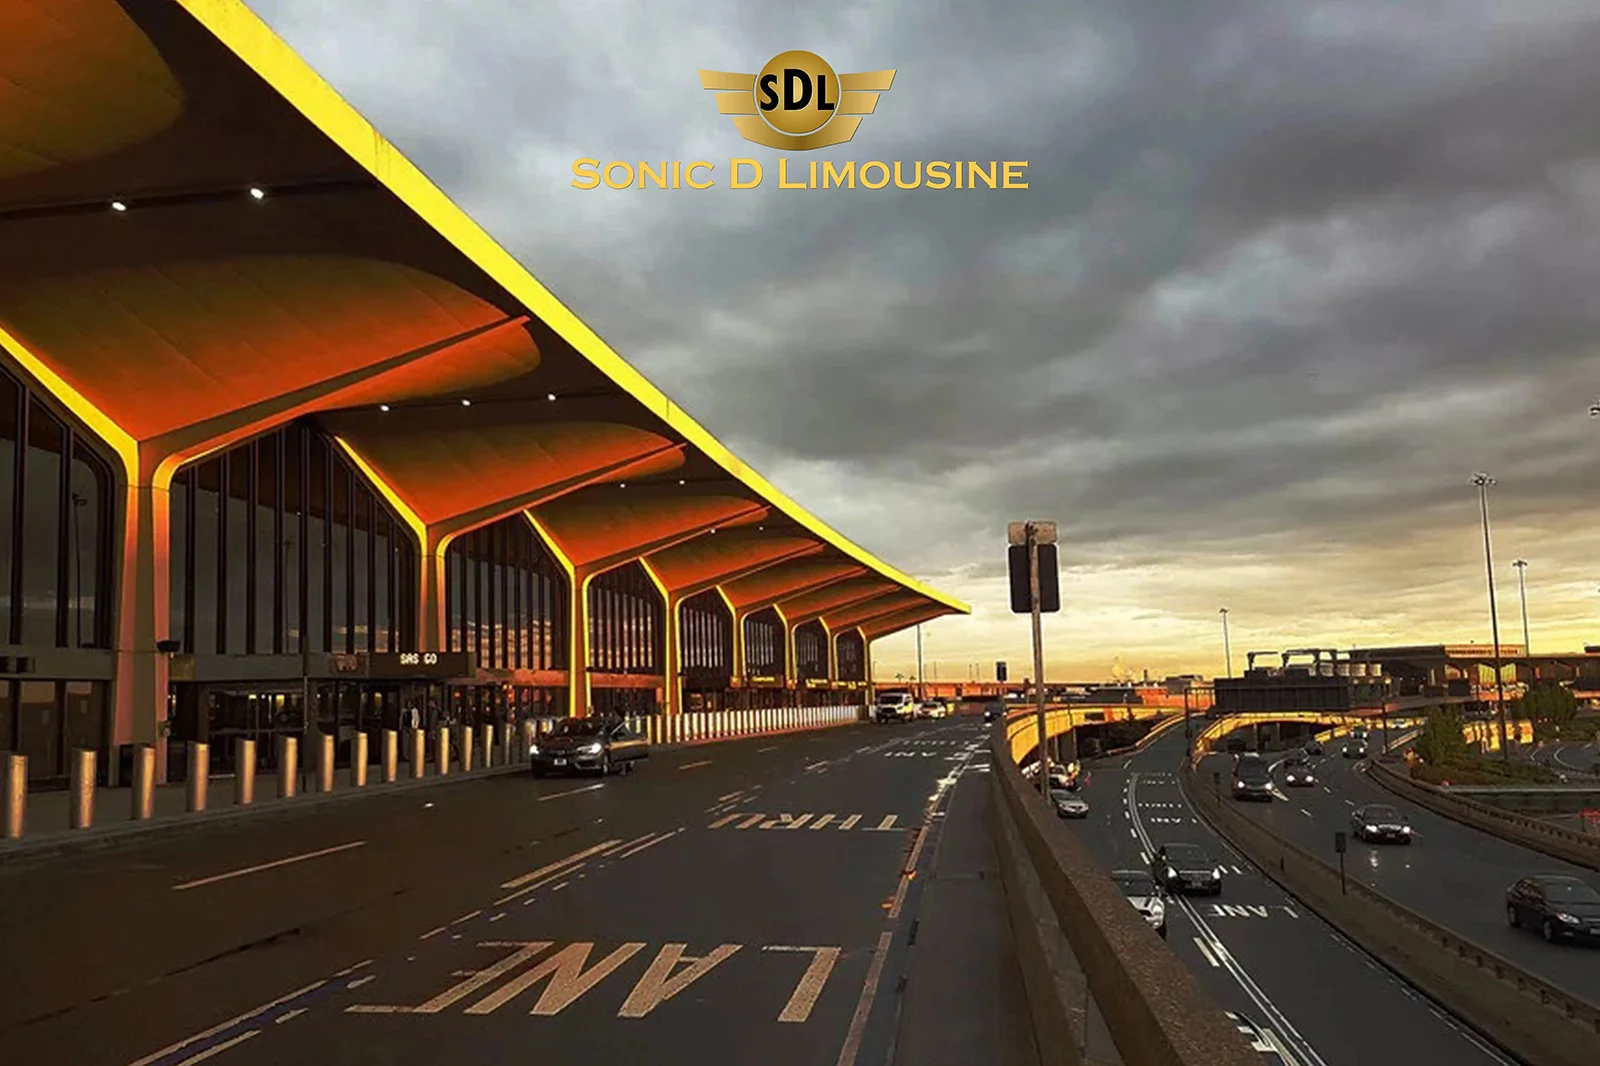 Sonic D Limousine An airport with a large building and a yellow sign.